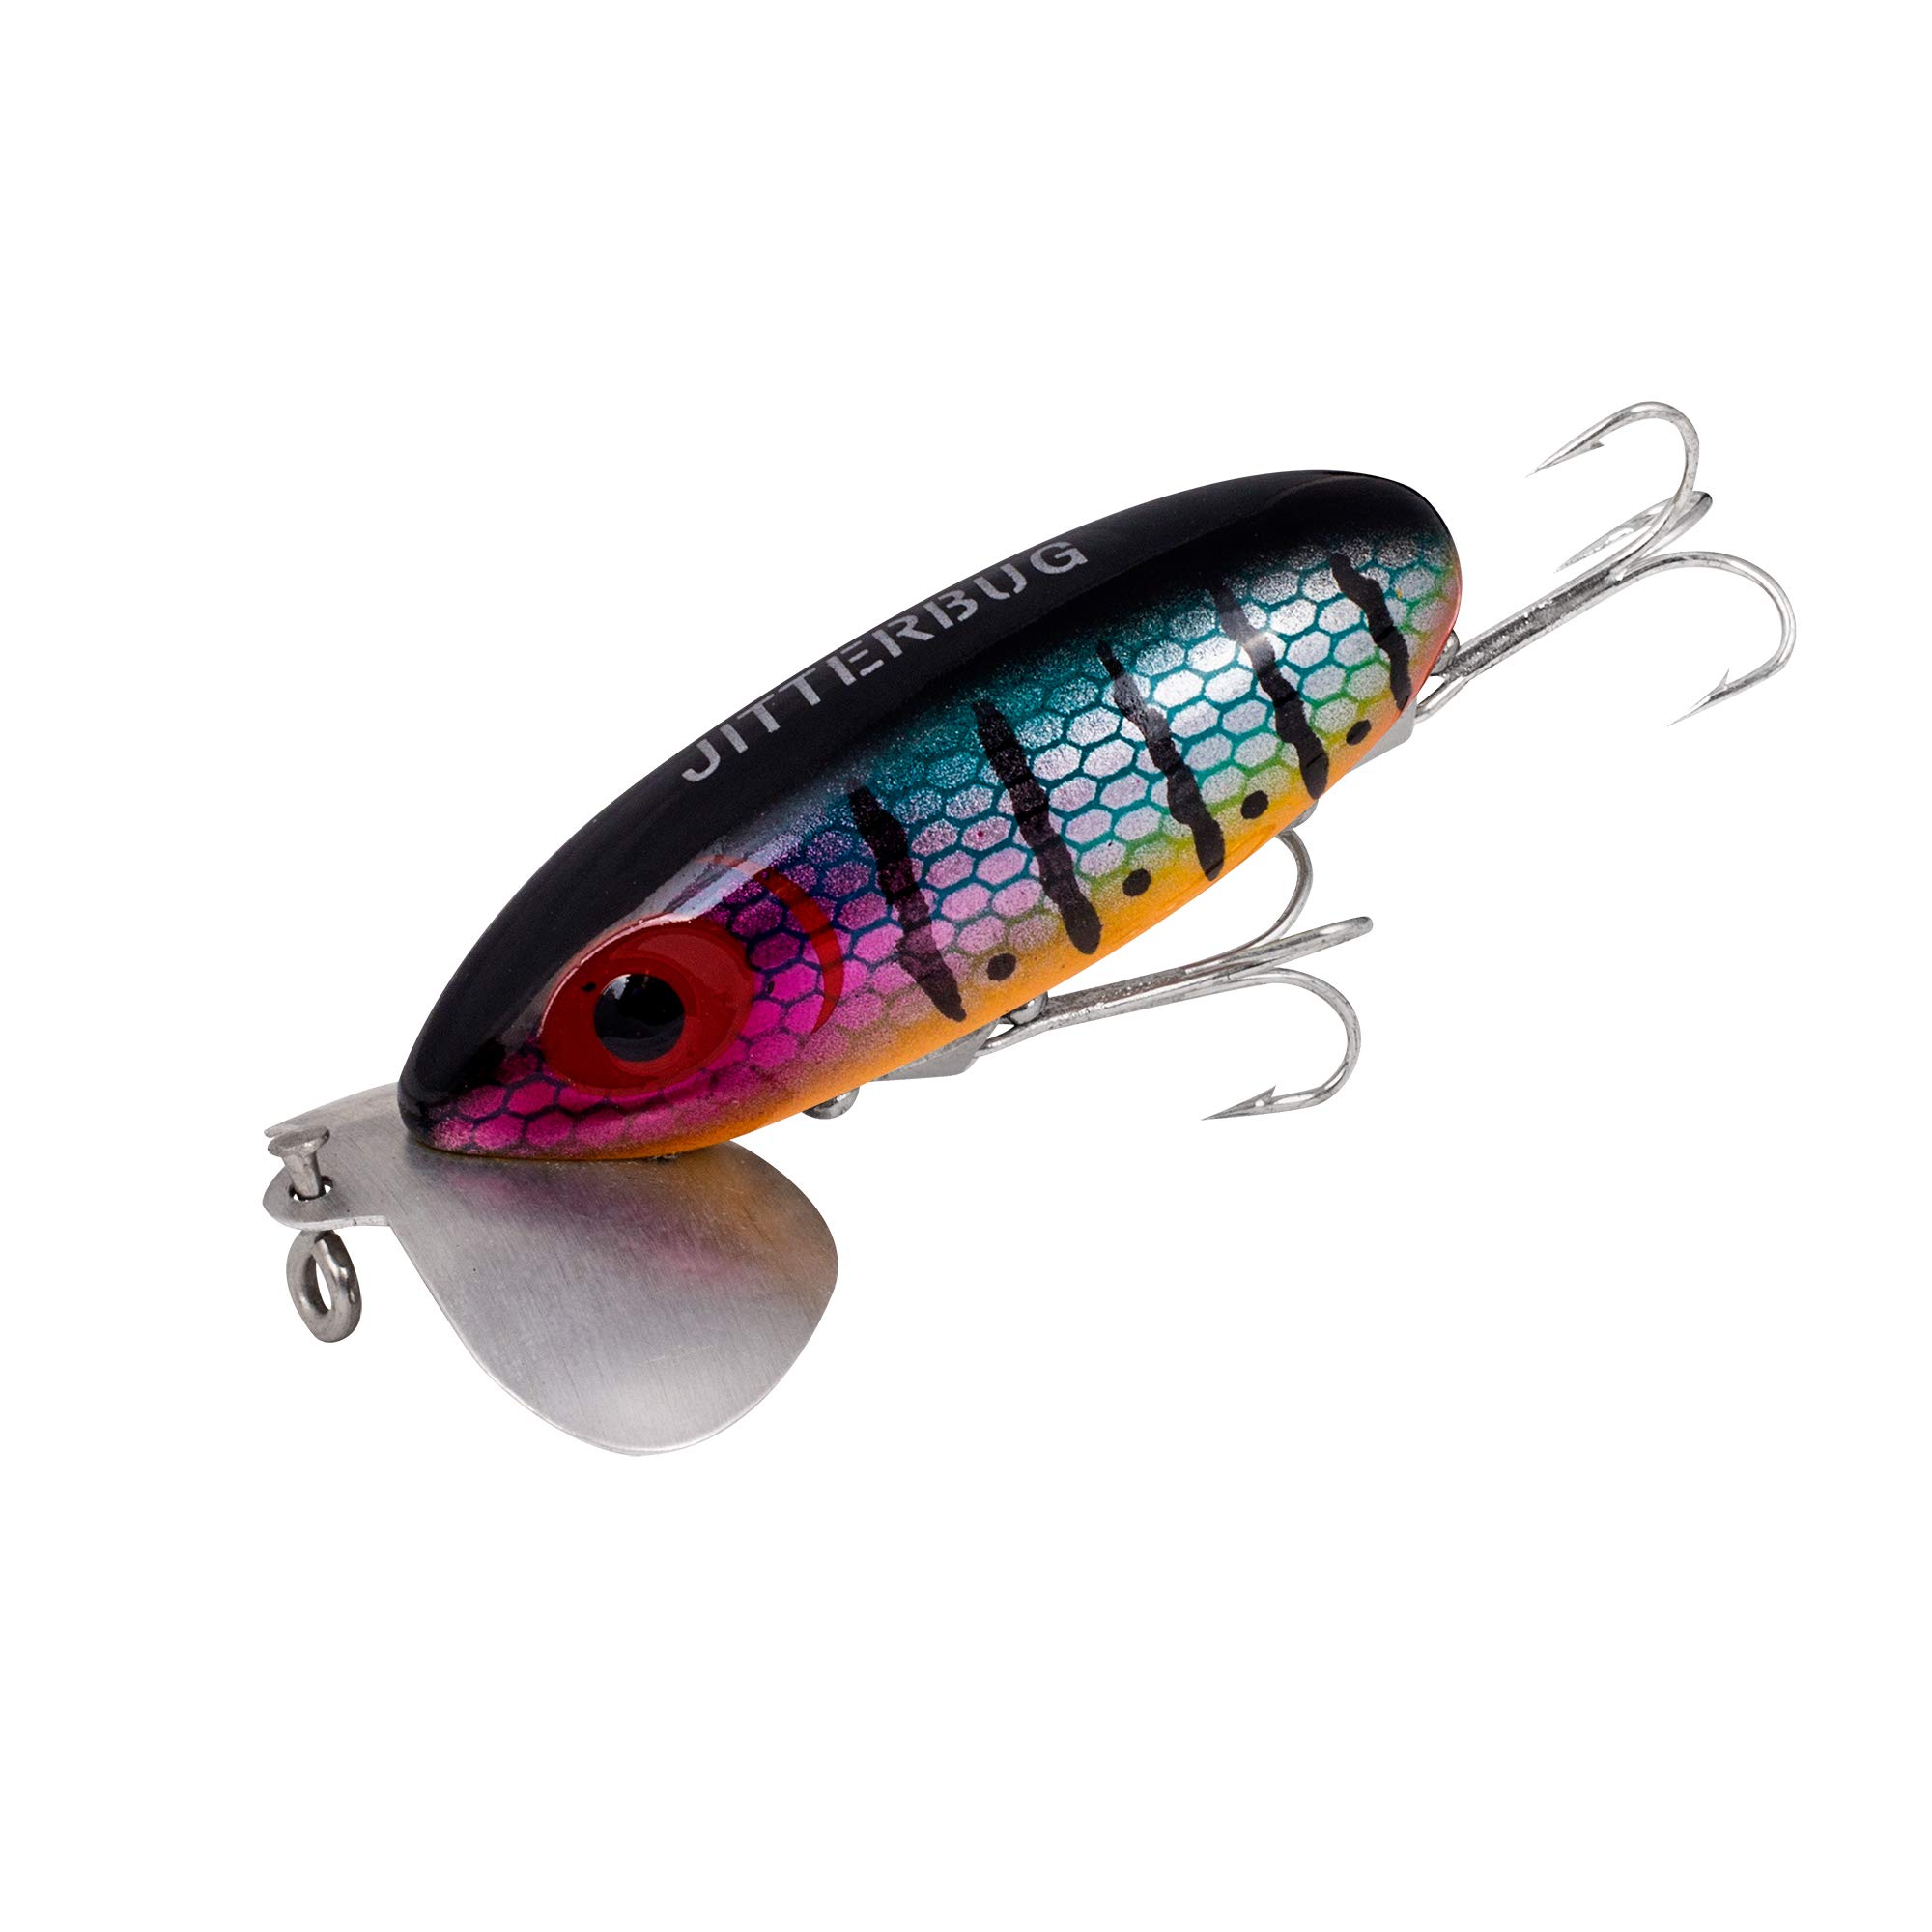 Arbogast Jitterbug Topwater Bass Fishing Lure - Excellent for Night Fishing  G630 (2 in, 1/4 oz)